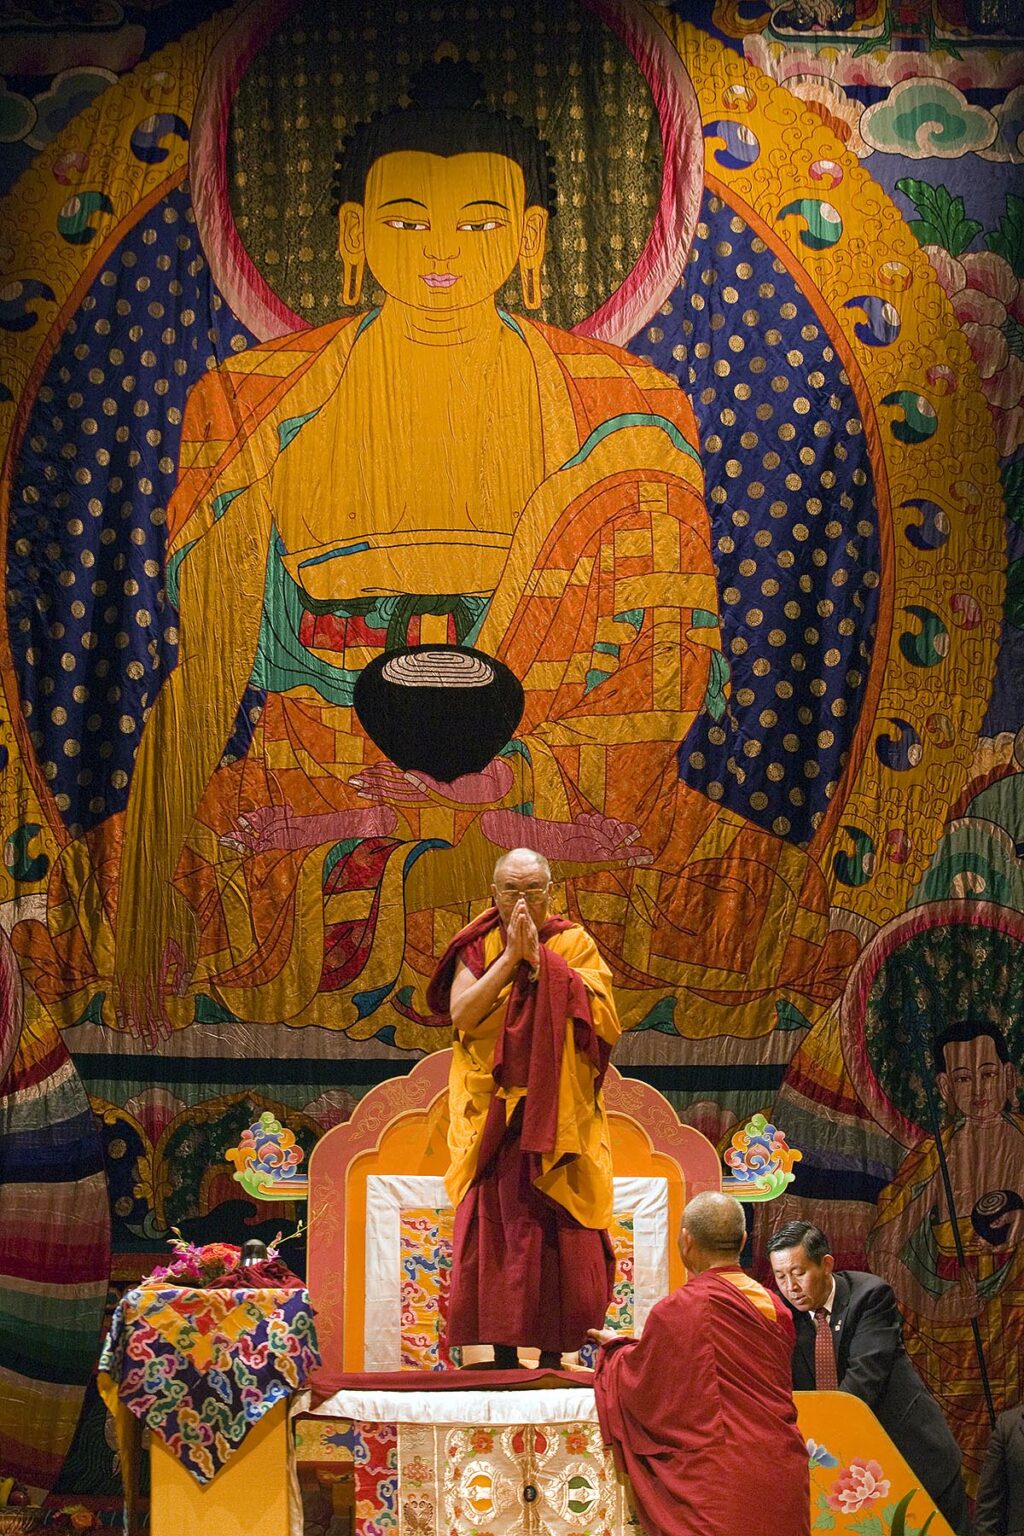 The 14th DALAI LAMA teaches ATISHA'S LAMP FOR THE PATH TO ENLIGHTENMENT in October 2007 sponsored by KUMBUM CHAMTSE LING and the TIBETAN CULTURAL CENTER, BLOOMINGTON, INDIANA